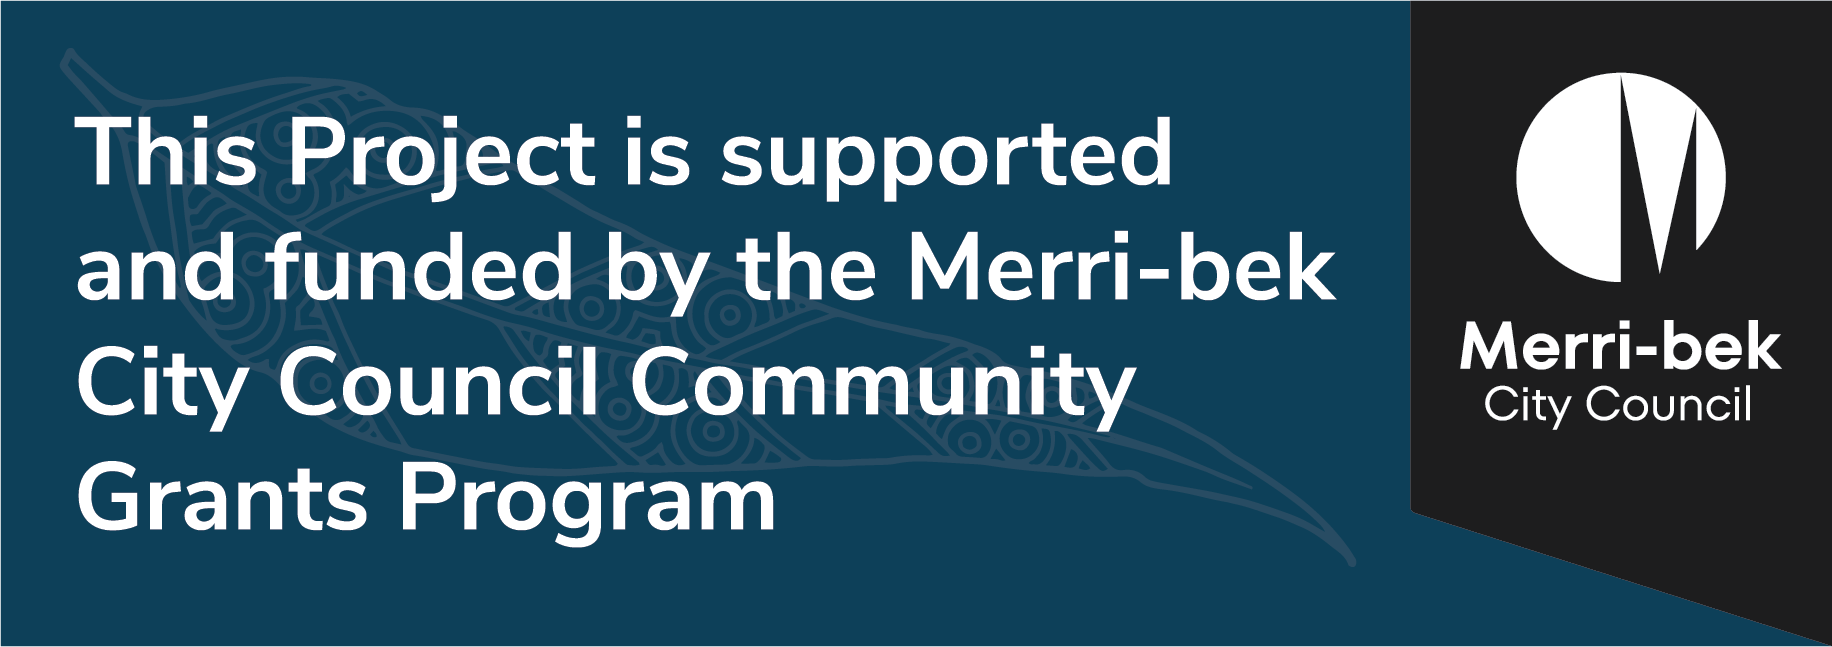 Merri-bek City Council logo and text that reads: This project is supported and funded by the Merri-bek City Council Community Grants Program.